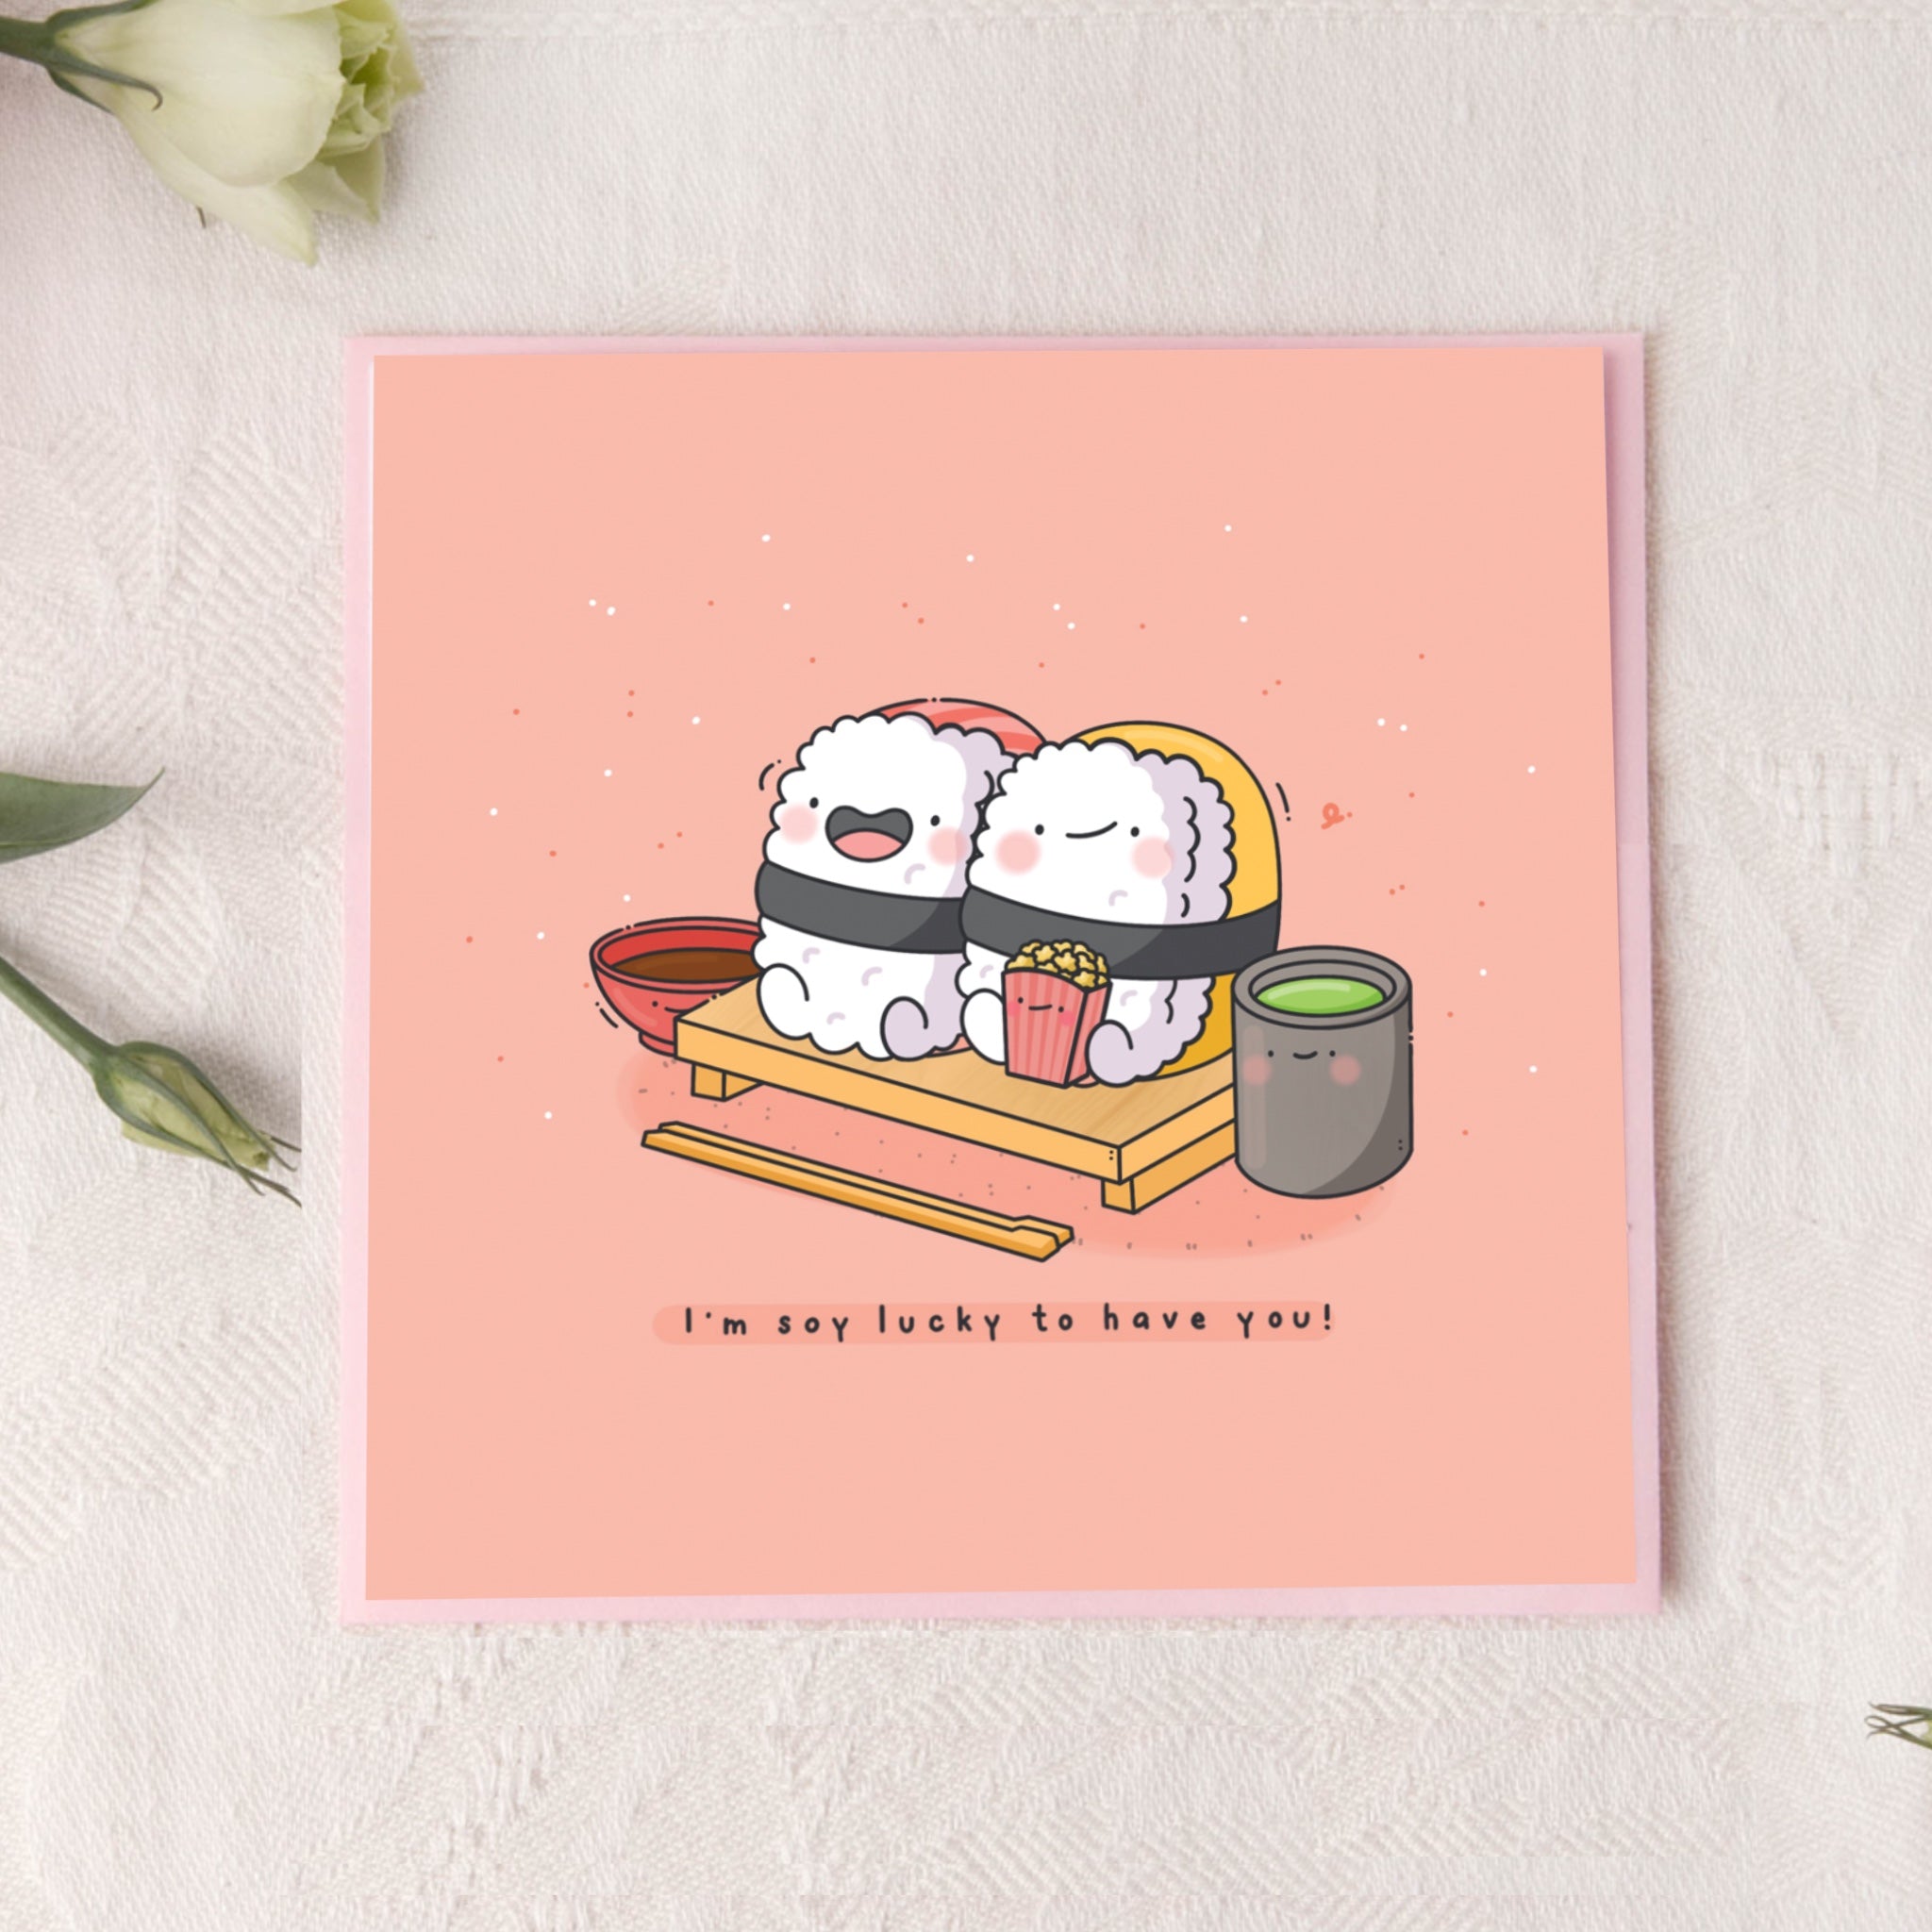 Sushi card on pink background